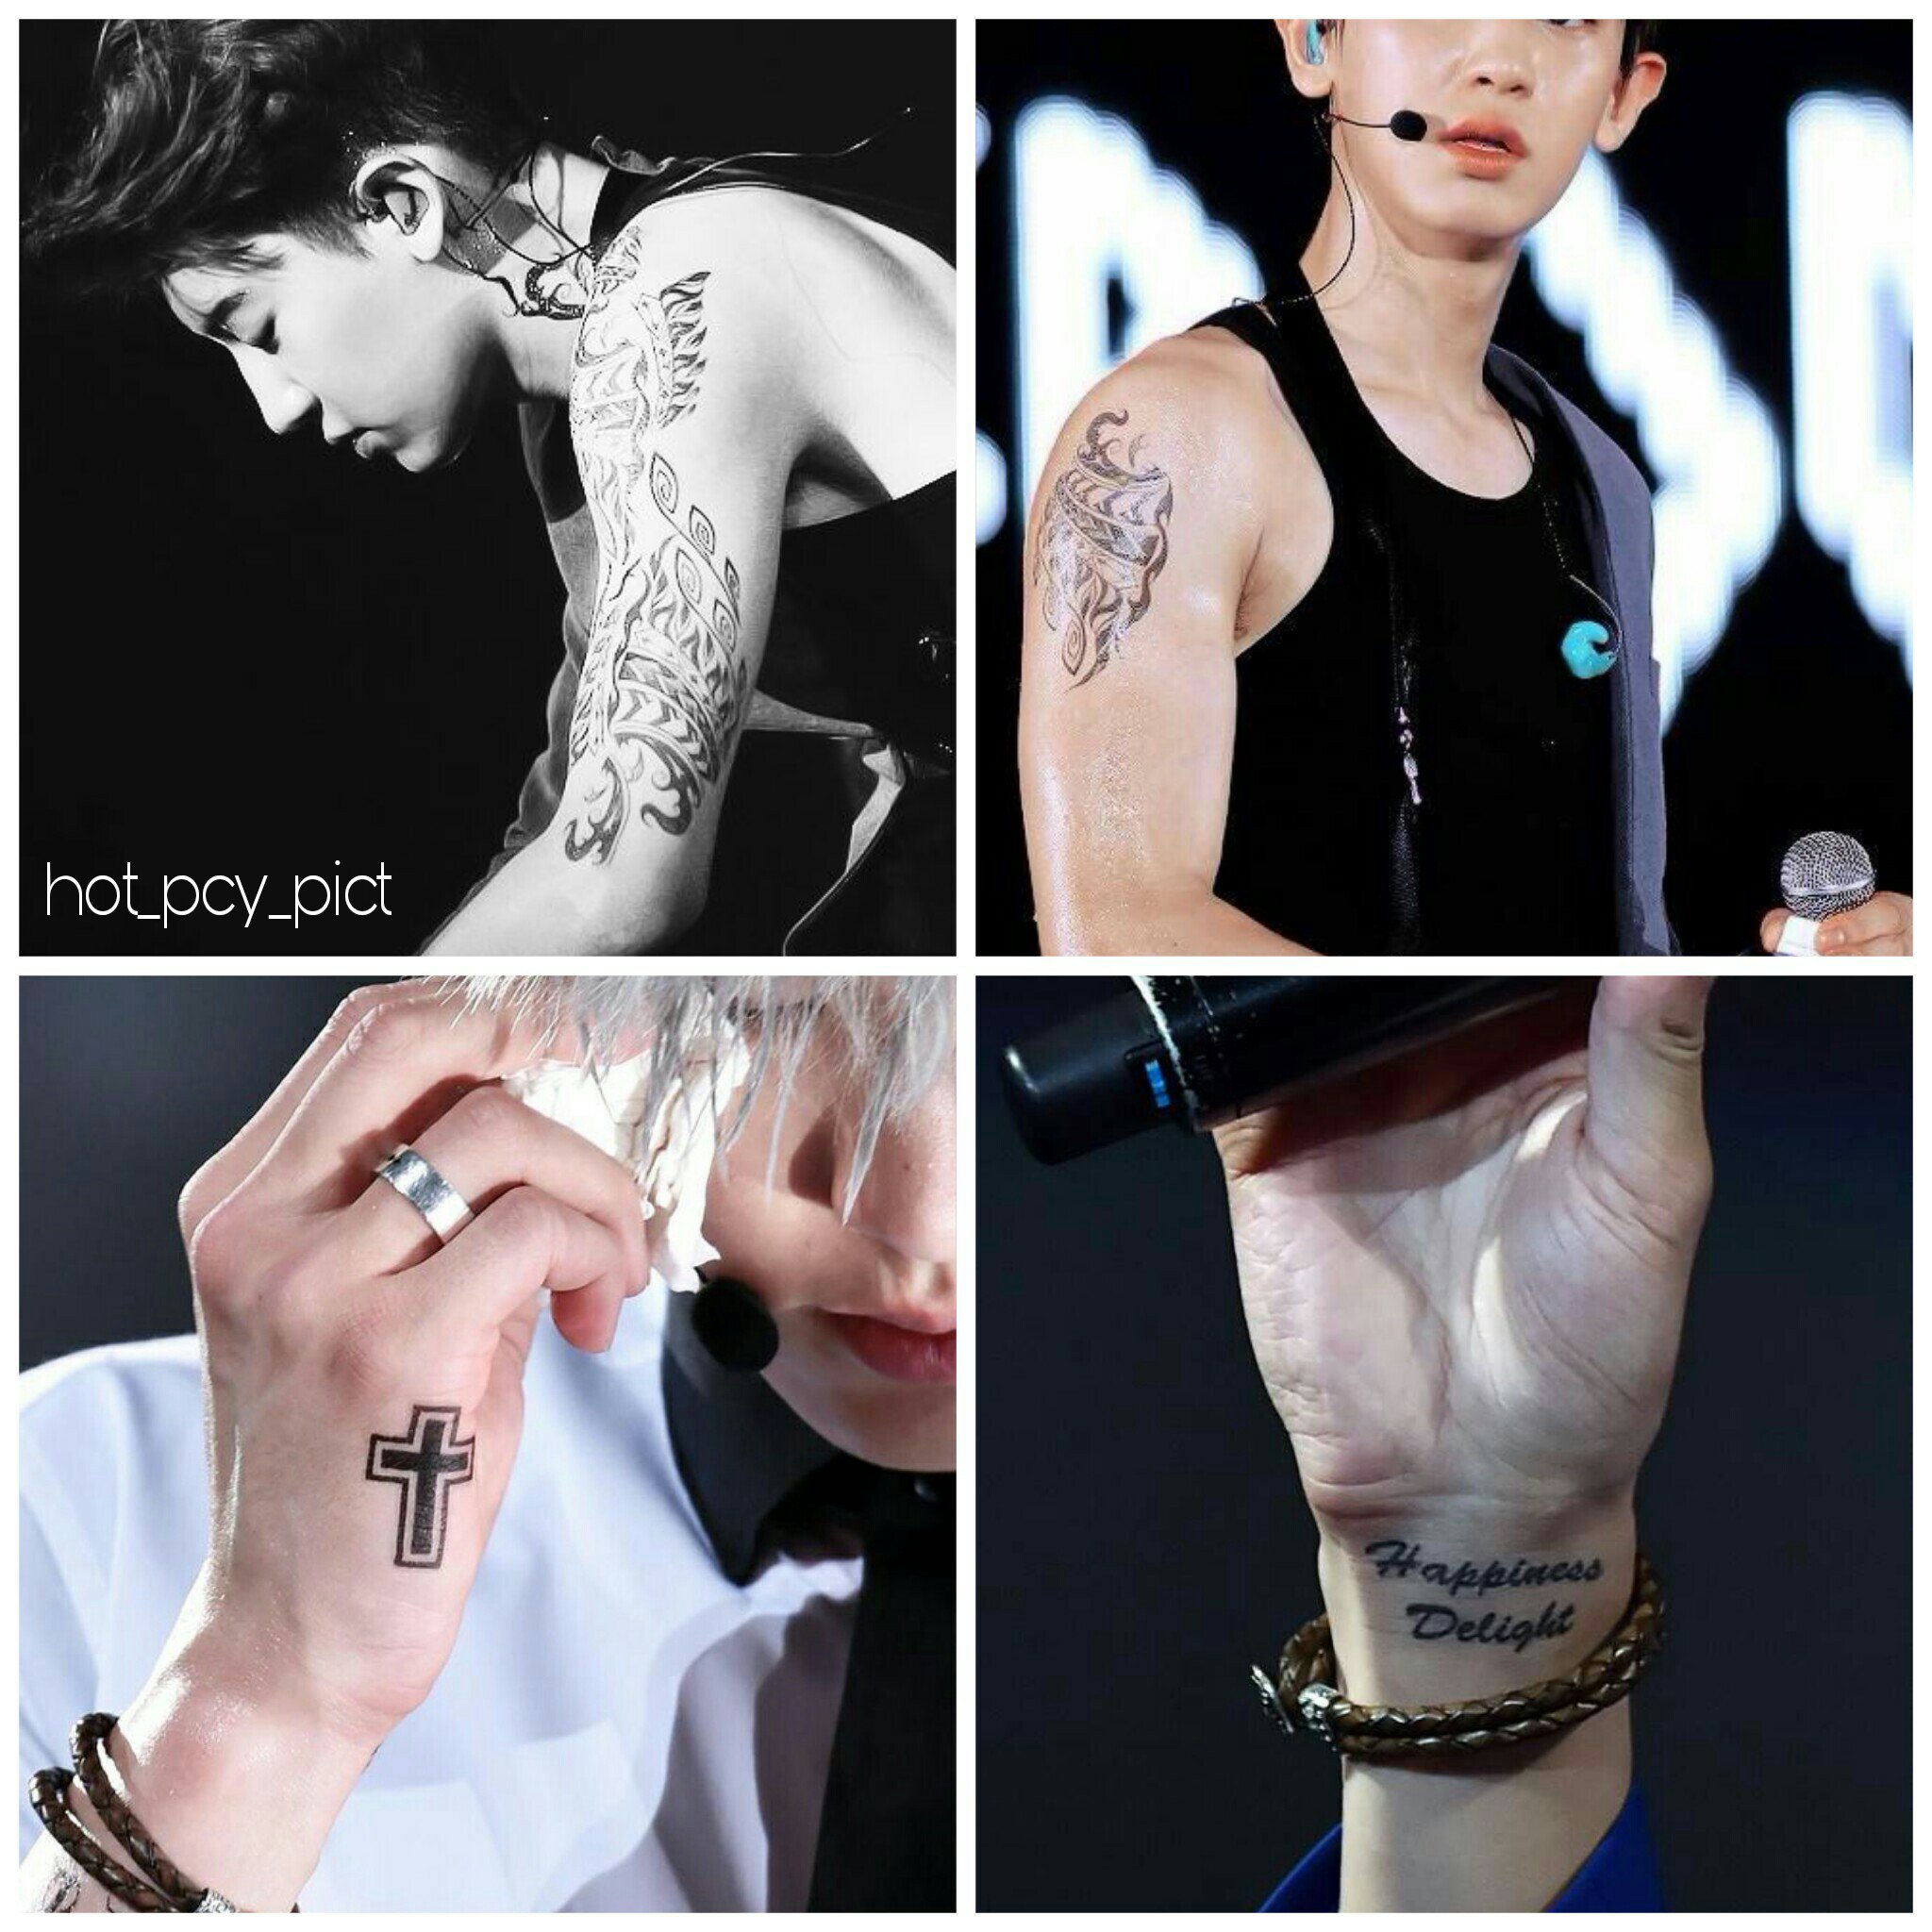 chanyeol pics on Twitter: "chanyeol's tattoo from 2014 ➡ 201